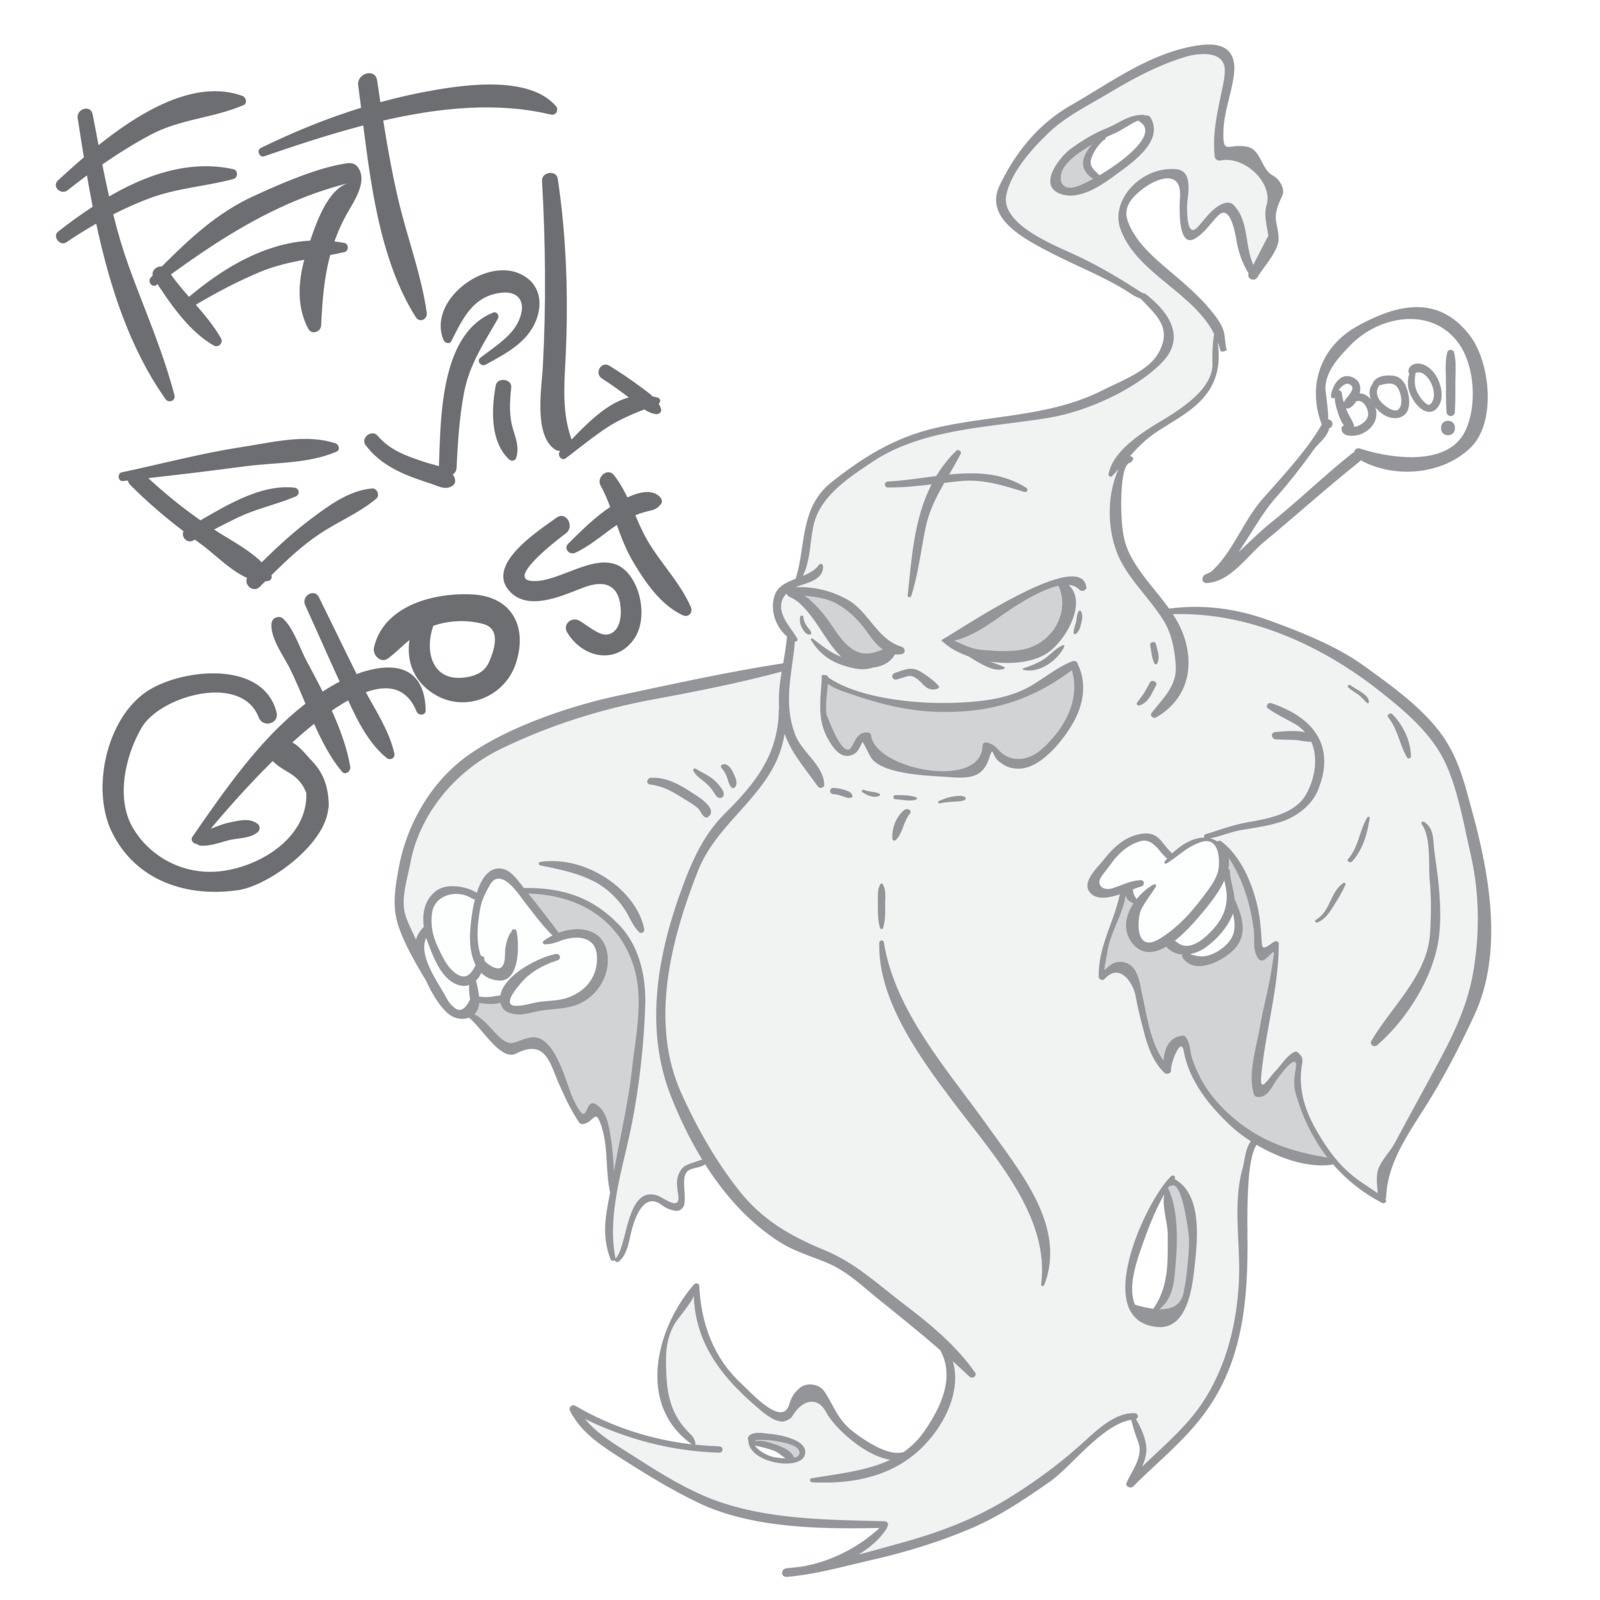 fat evil ghost by ainsel